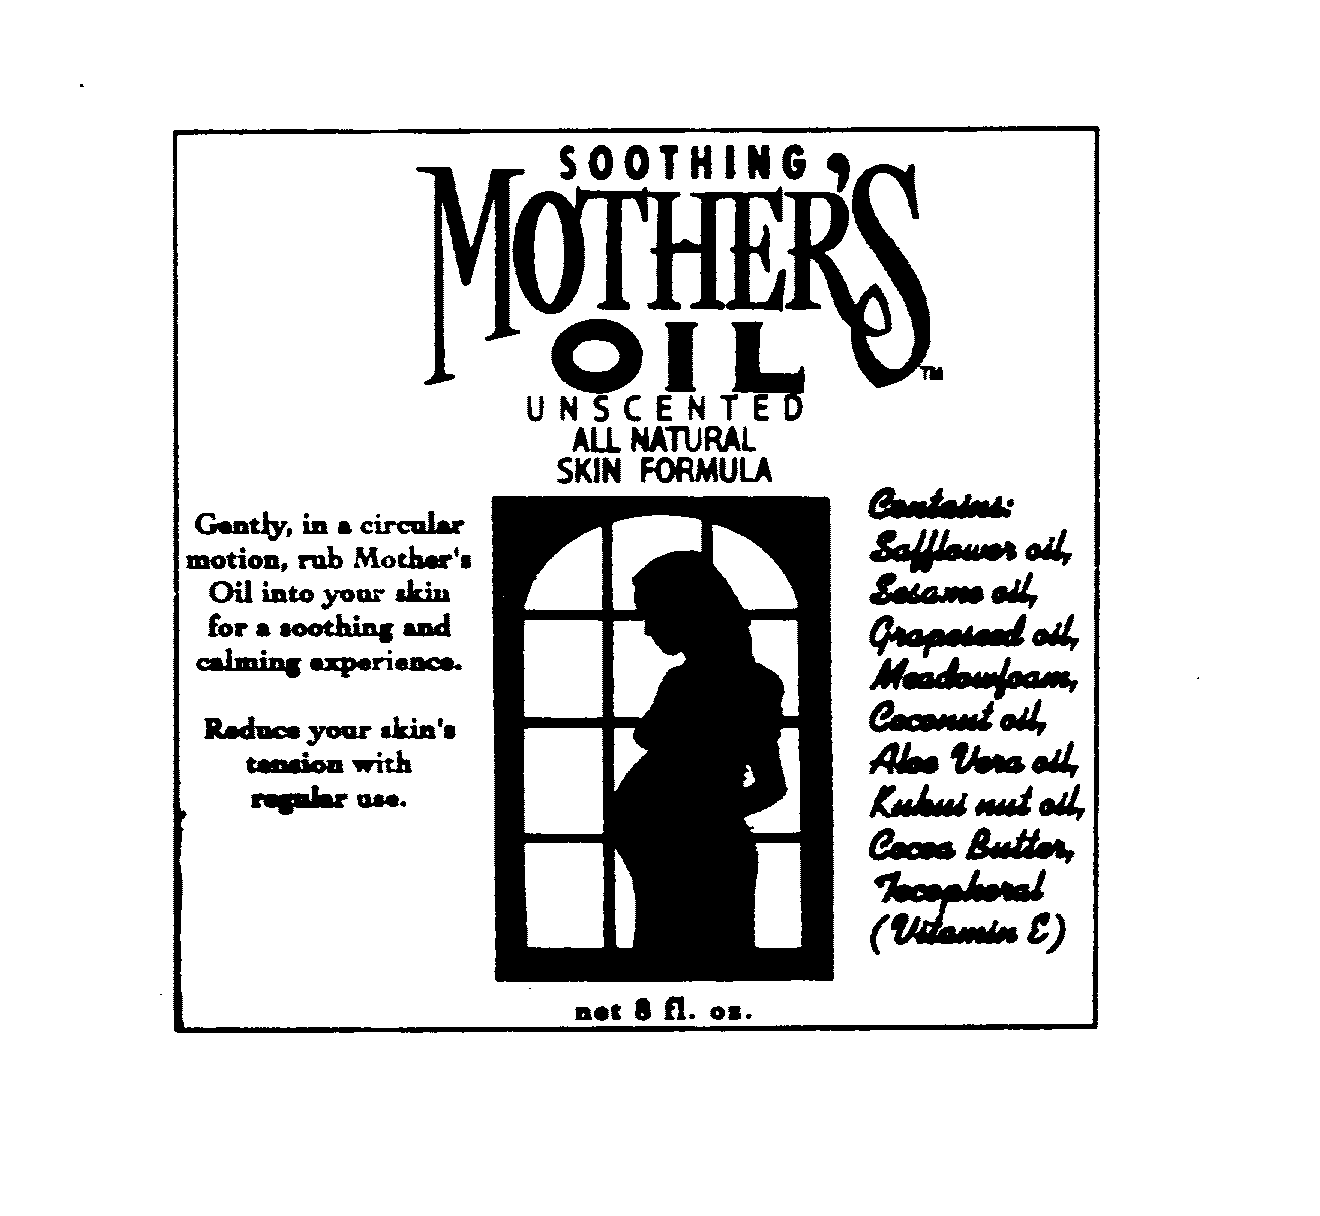  SOOTHING MOTHER'S OIL (AND OTHER NOTATIONS)